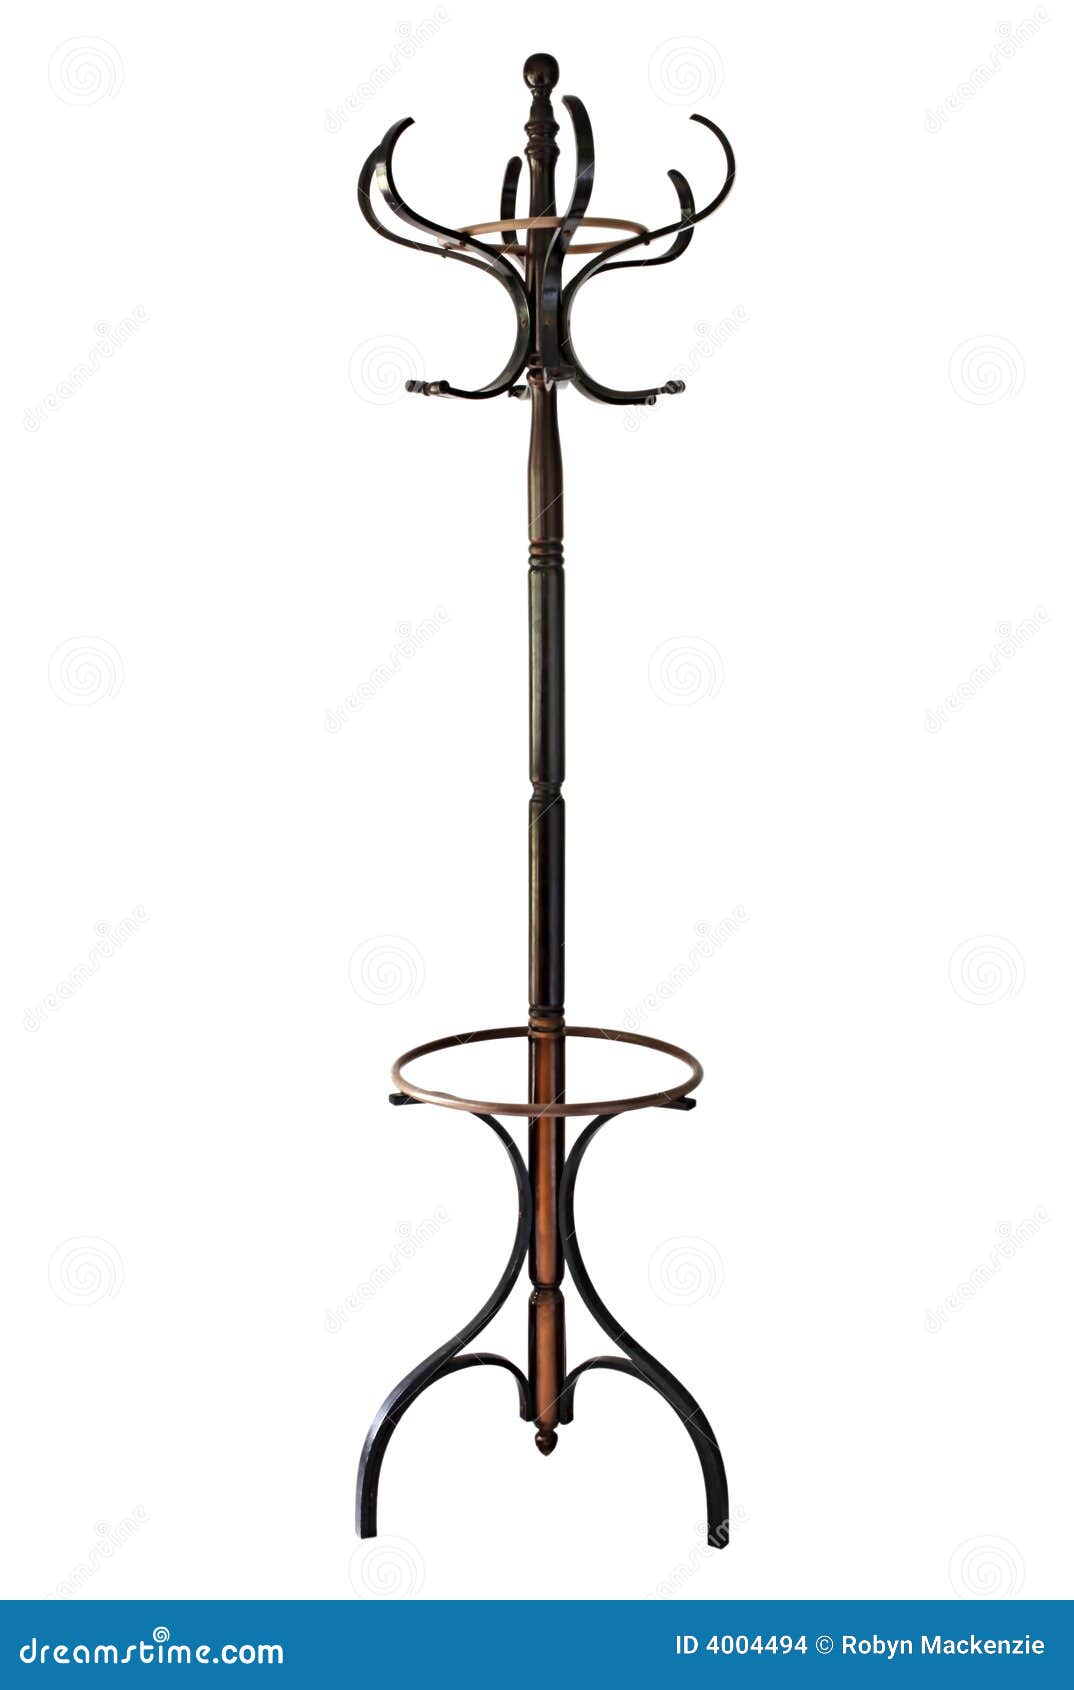 Vintage Coat Rack With Path Stock Images - Image: 4004494